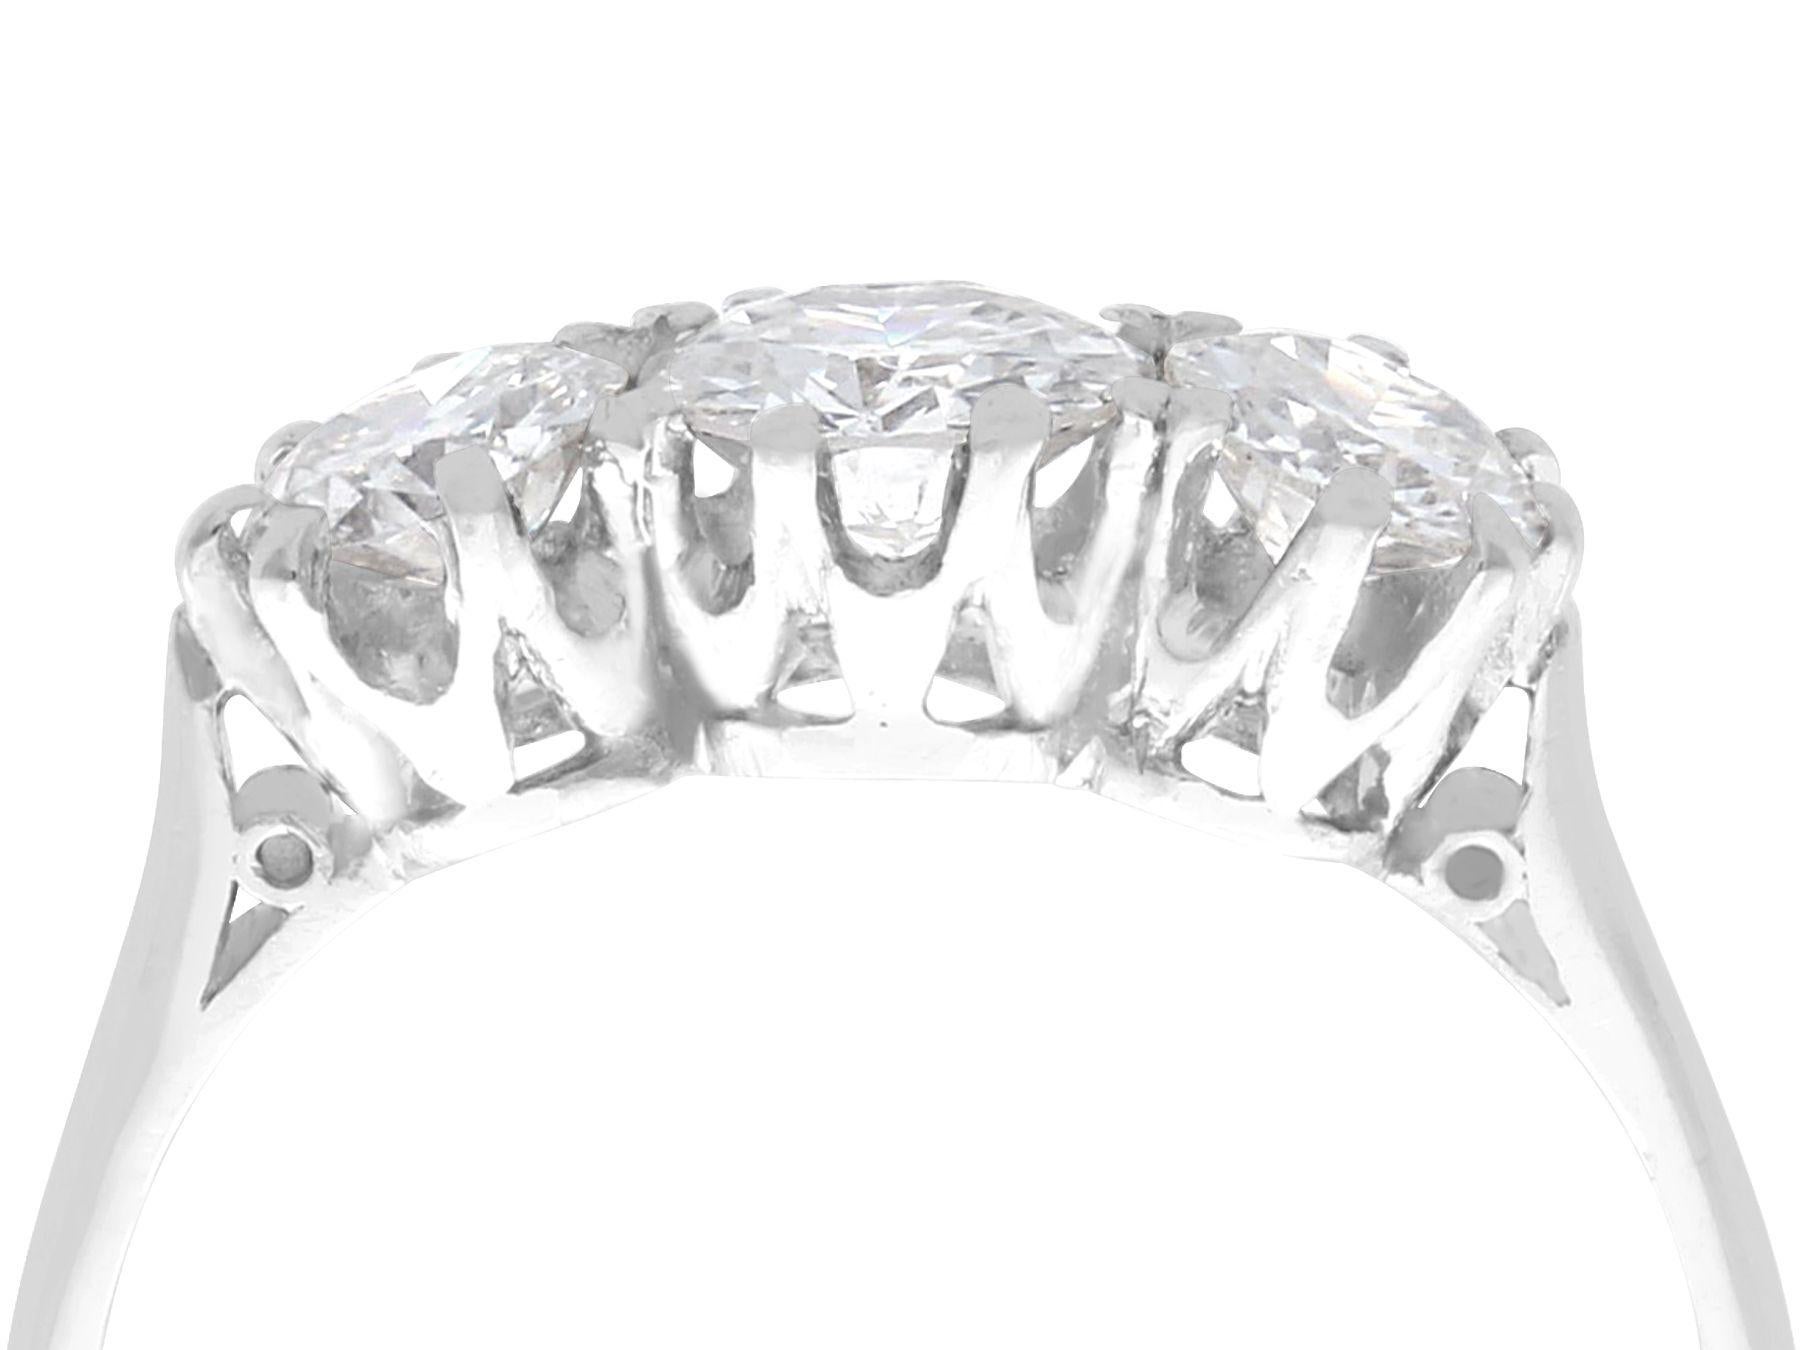 A fine and impressive antique 1.16 carat diamond and platinum three stone ring; part of our diamond jewellery collections.

This impressive diamond platinum trilogy diamond ring has been crafted in platinum.

The antique ring displays three